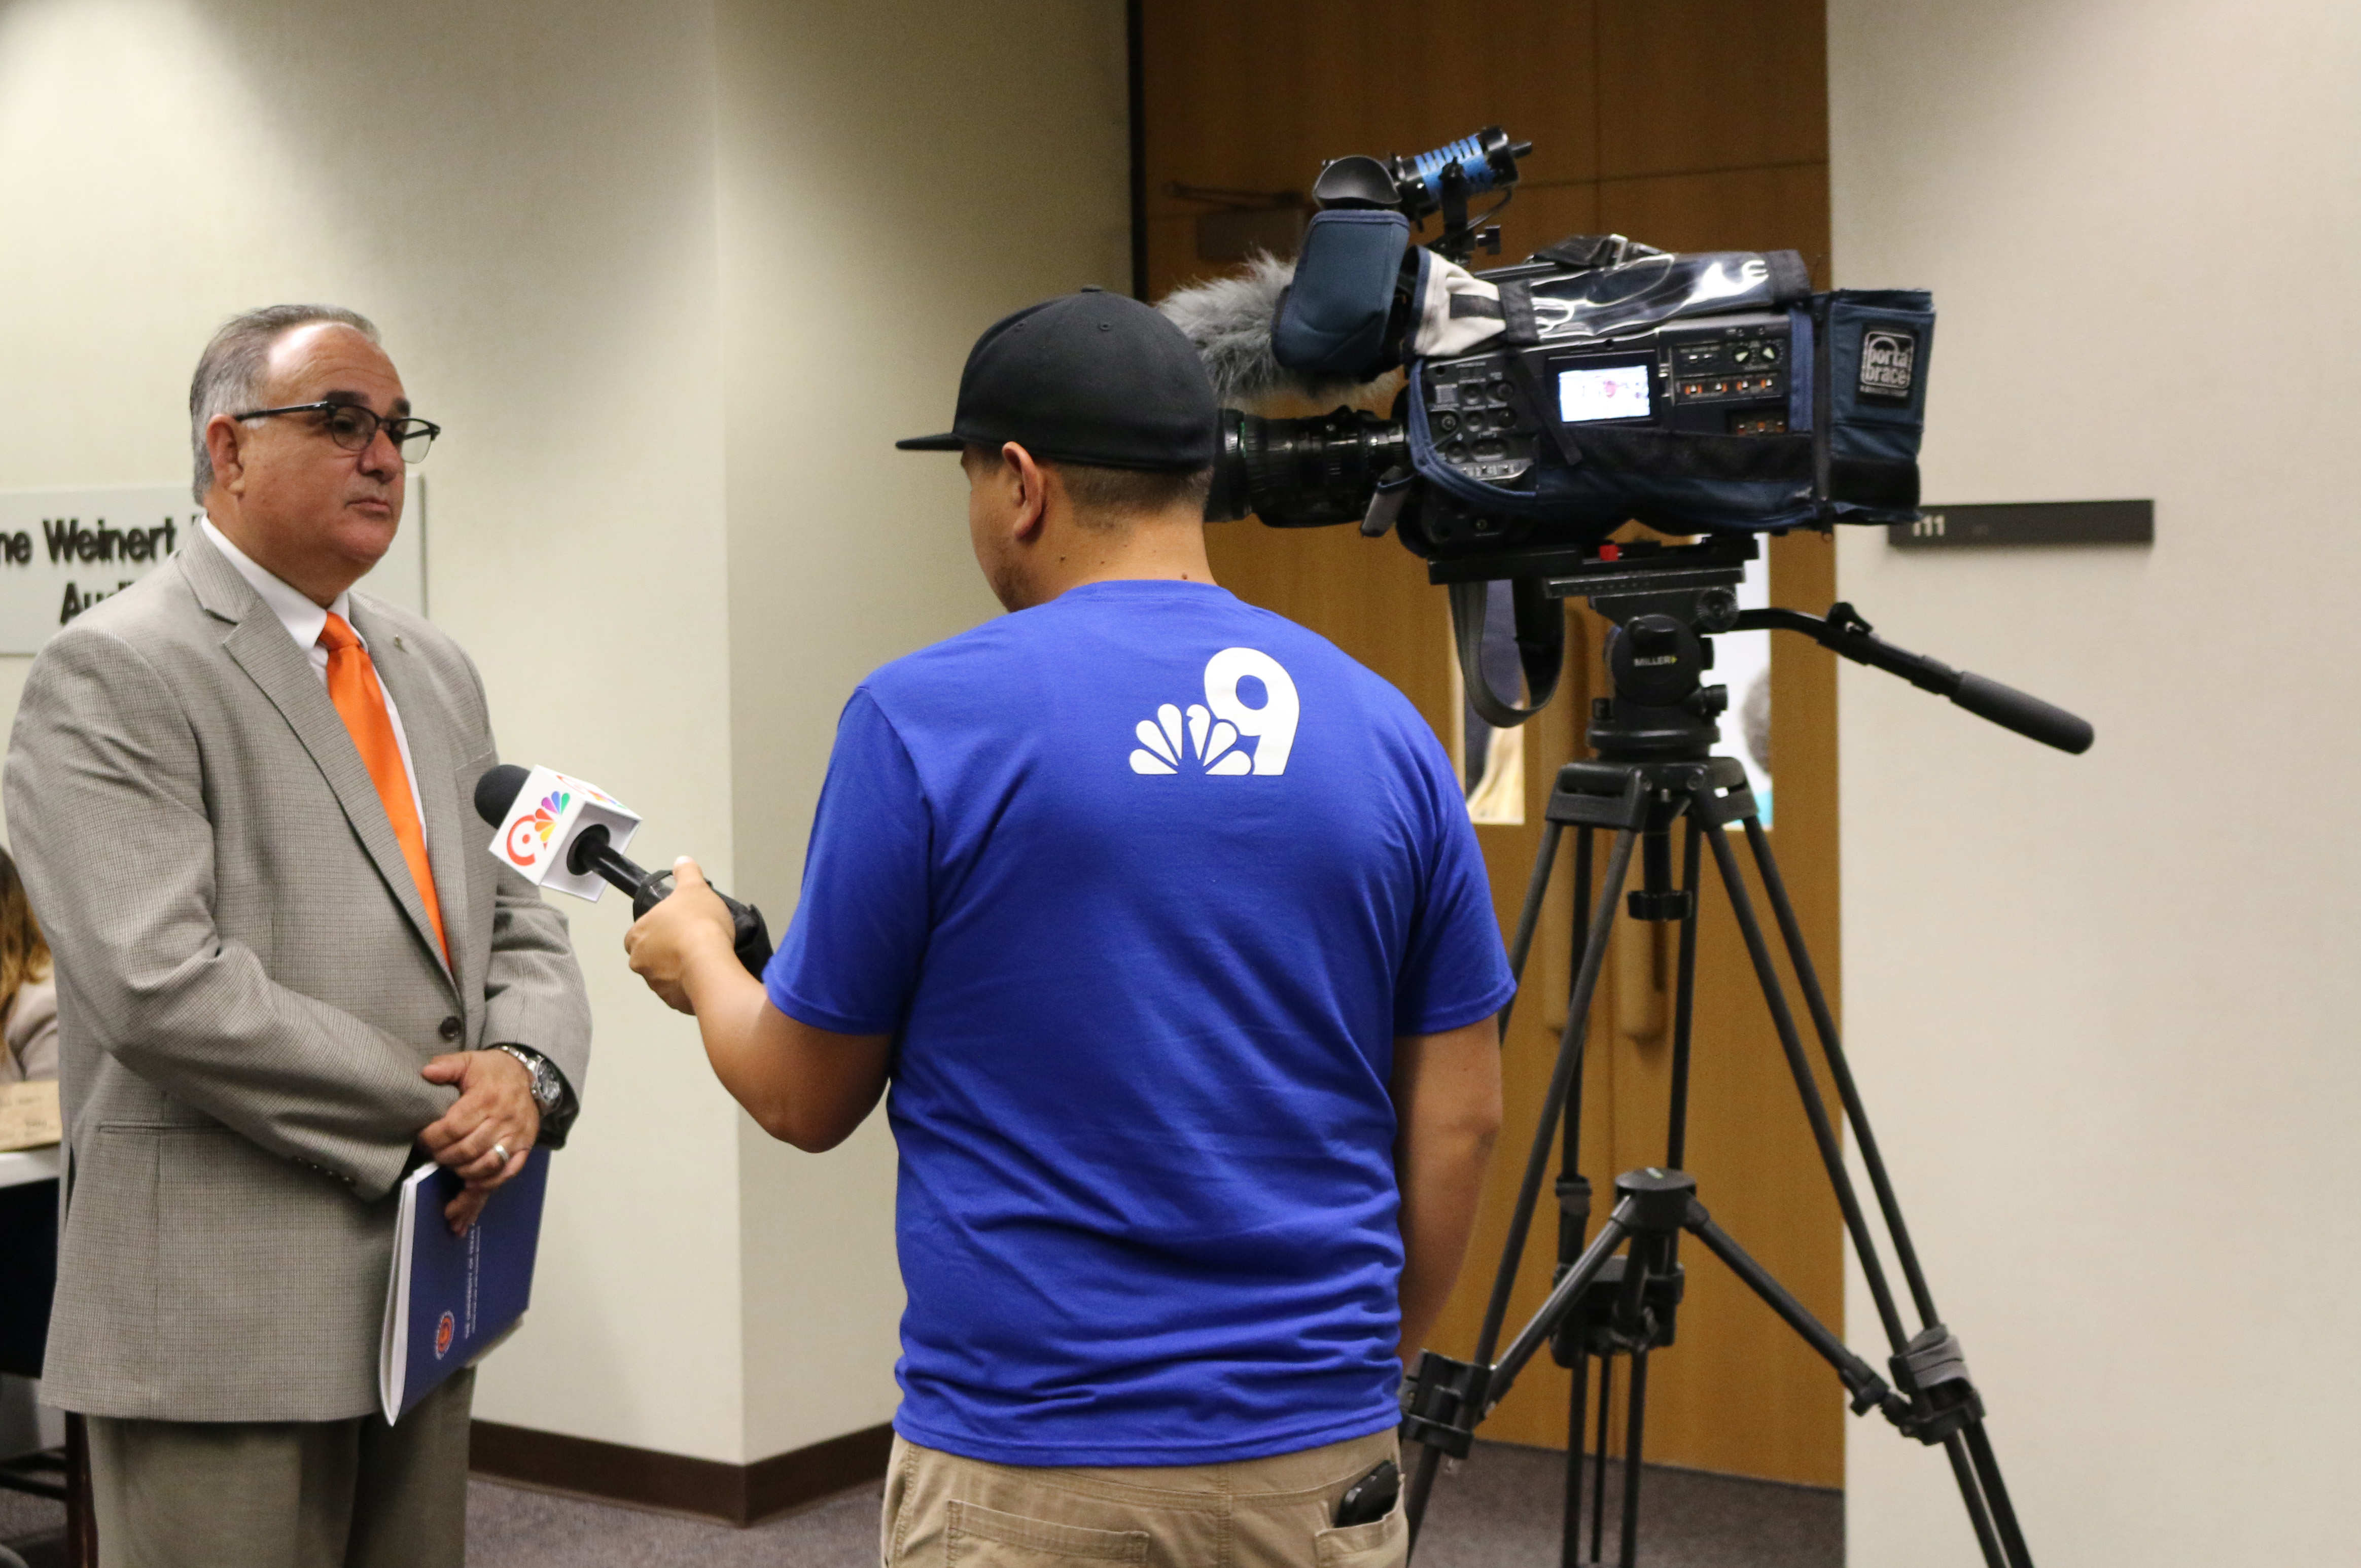 PI Victor M. Manjarrez Jr. discussing the Homeland Security Symposium Series with the local NBC Television Affiliate